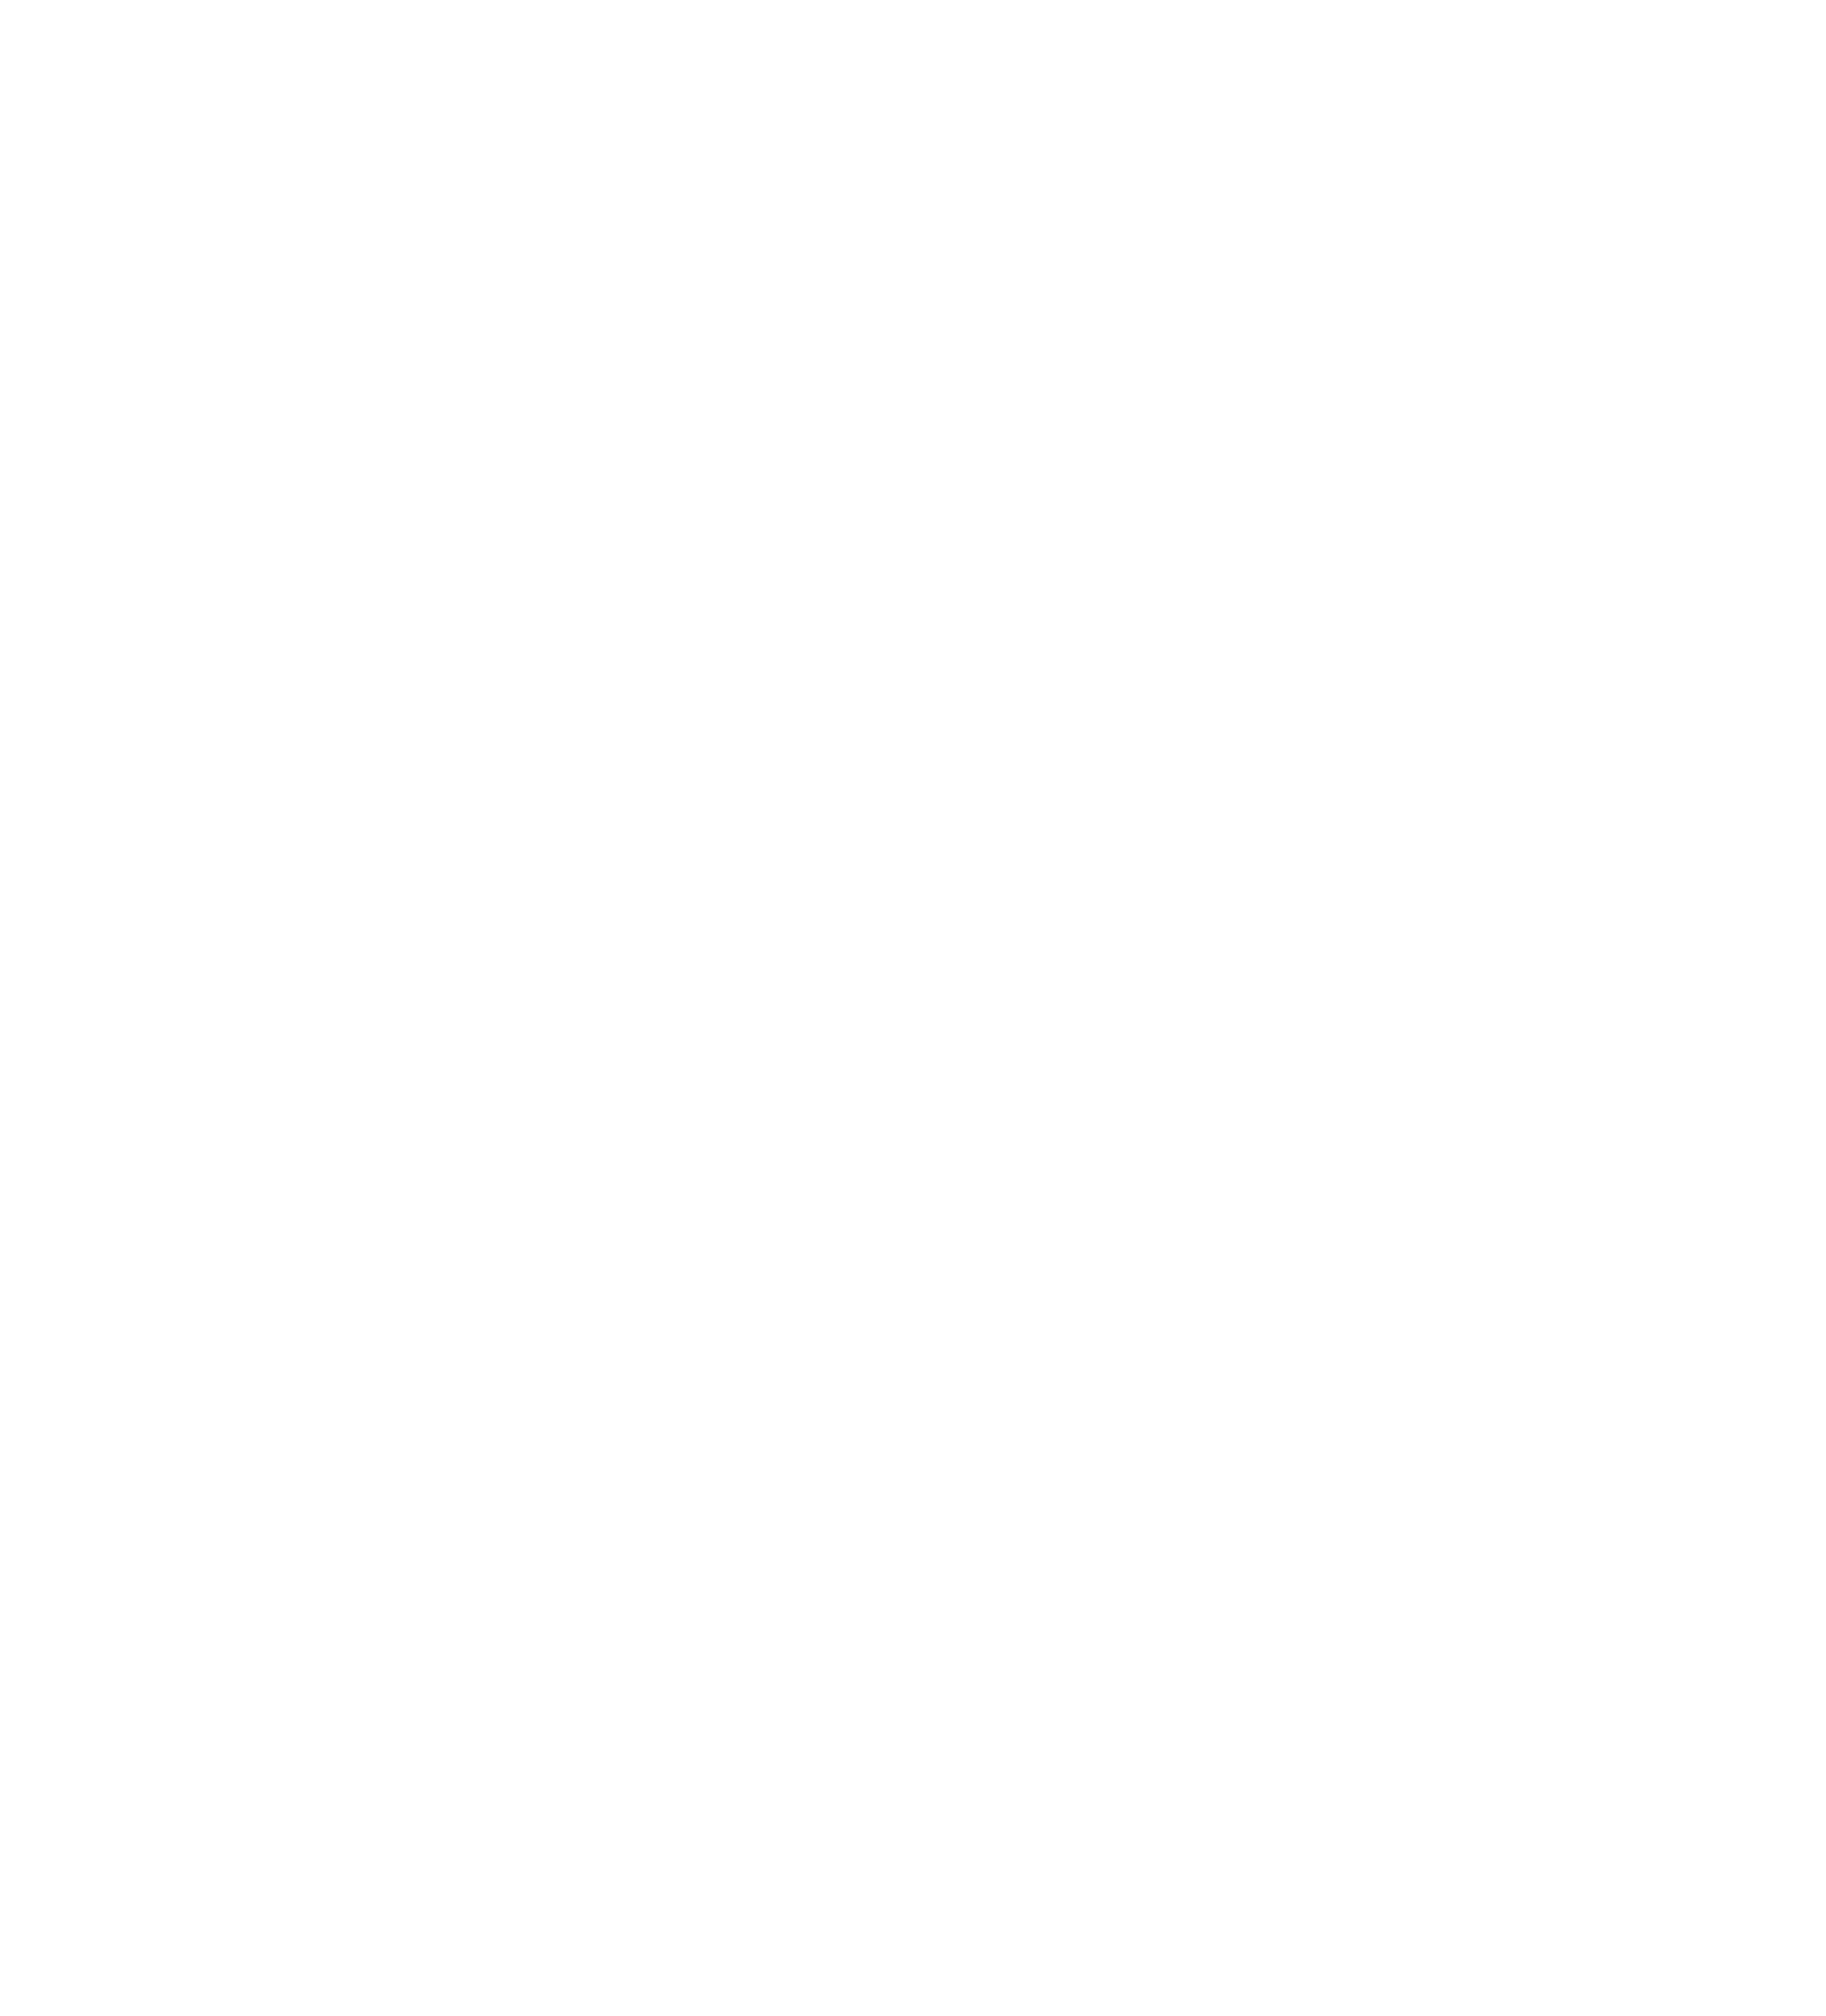 Charge_your_car_day_2023_Oct5_logo_Transparent.png